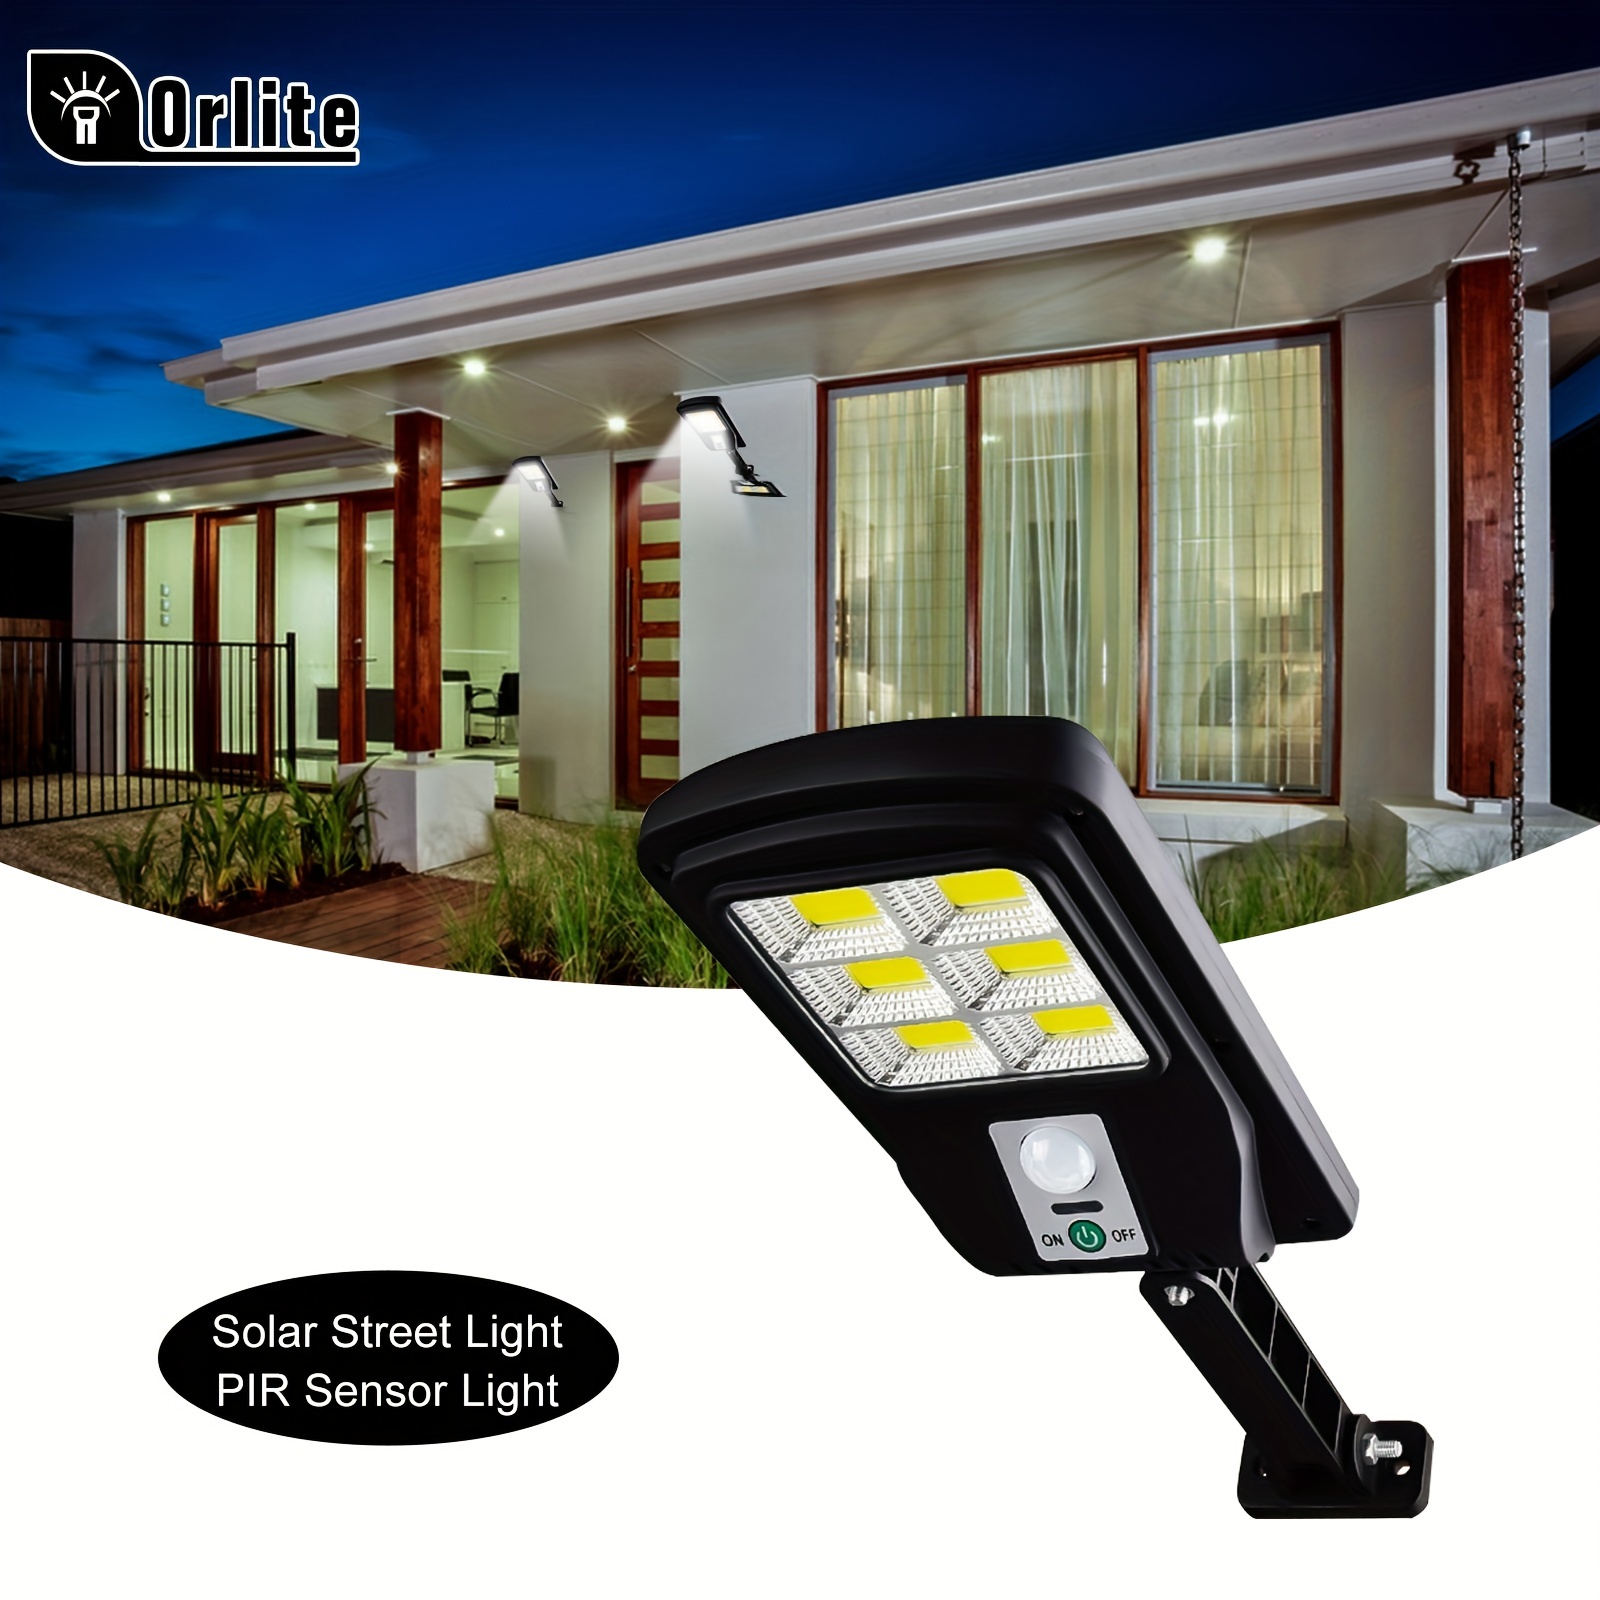 

Outdoor Solar Street Light With Pir Motion Sensor - Waterproof Solar Security Light With 3 Lighting Modes For Garden, Parking Lot, And Pathway